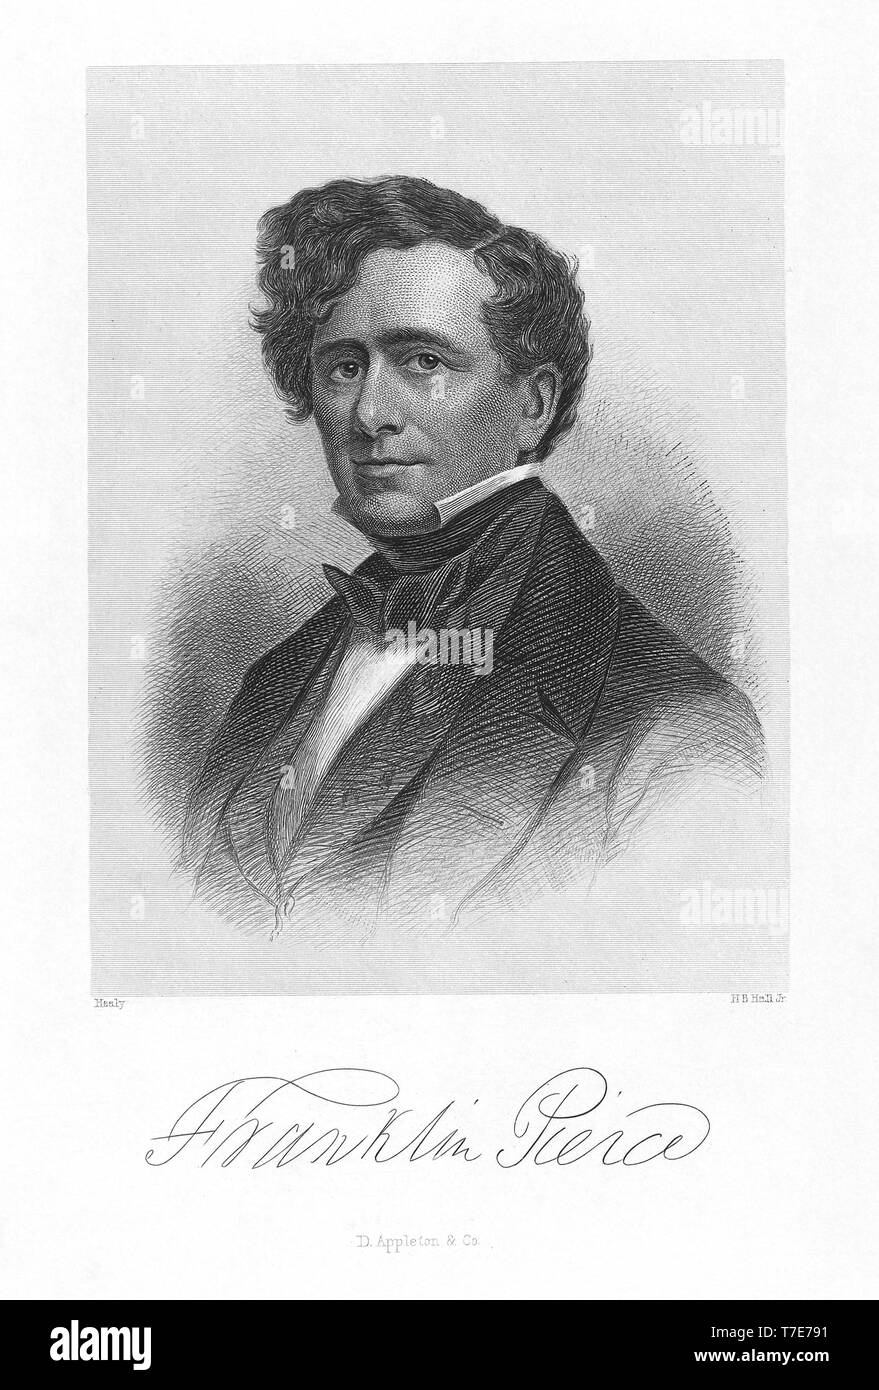 Franklin Pierce (1804-1869), 14th President of the United States, Half-Length Portrait, Engraving by H.B. Hall, Published by D. Appleton & Co., 1853 Stock Photo